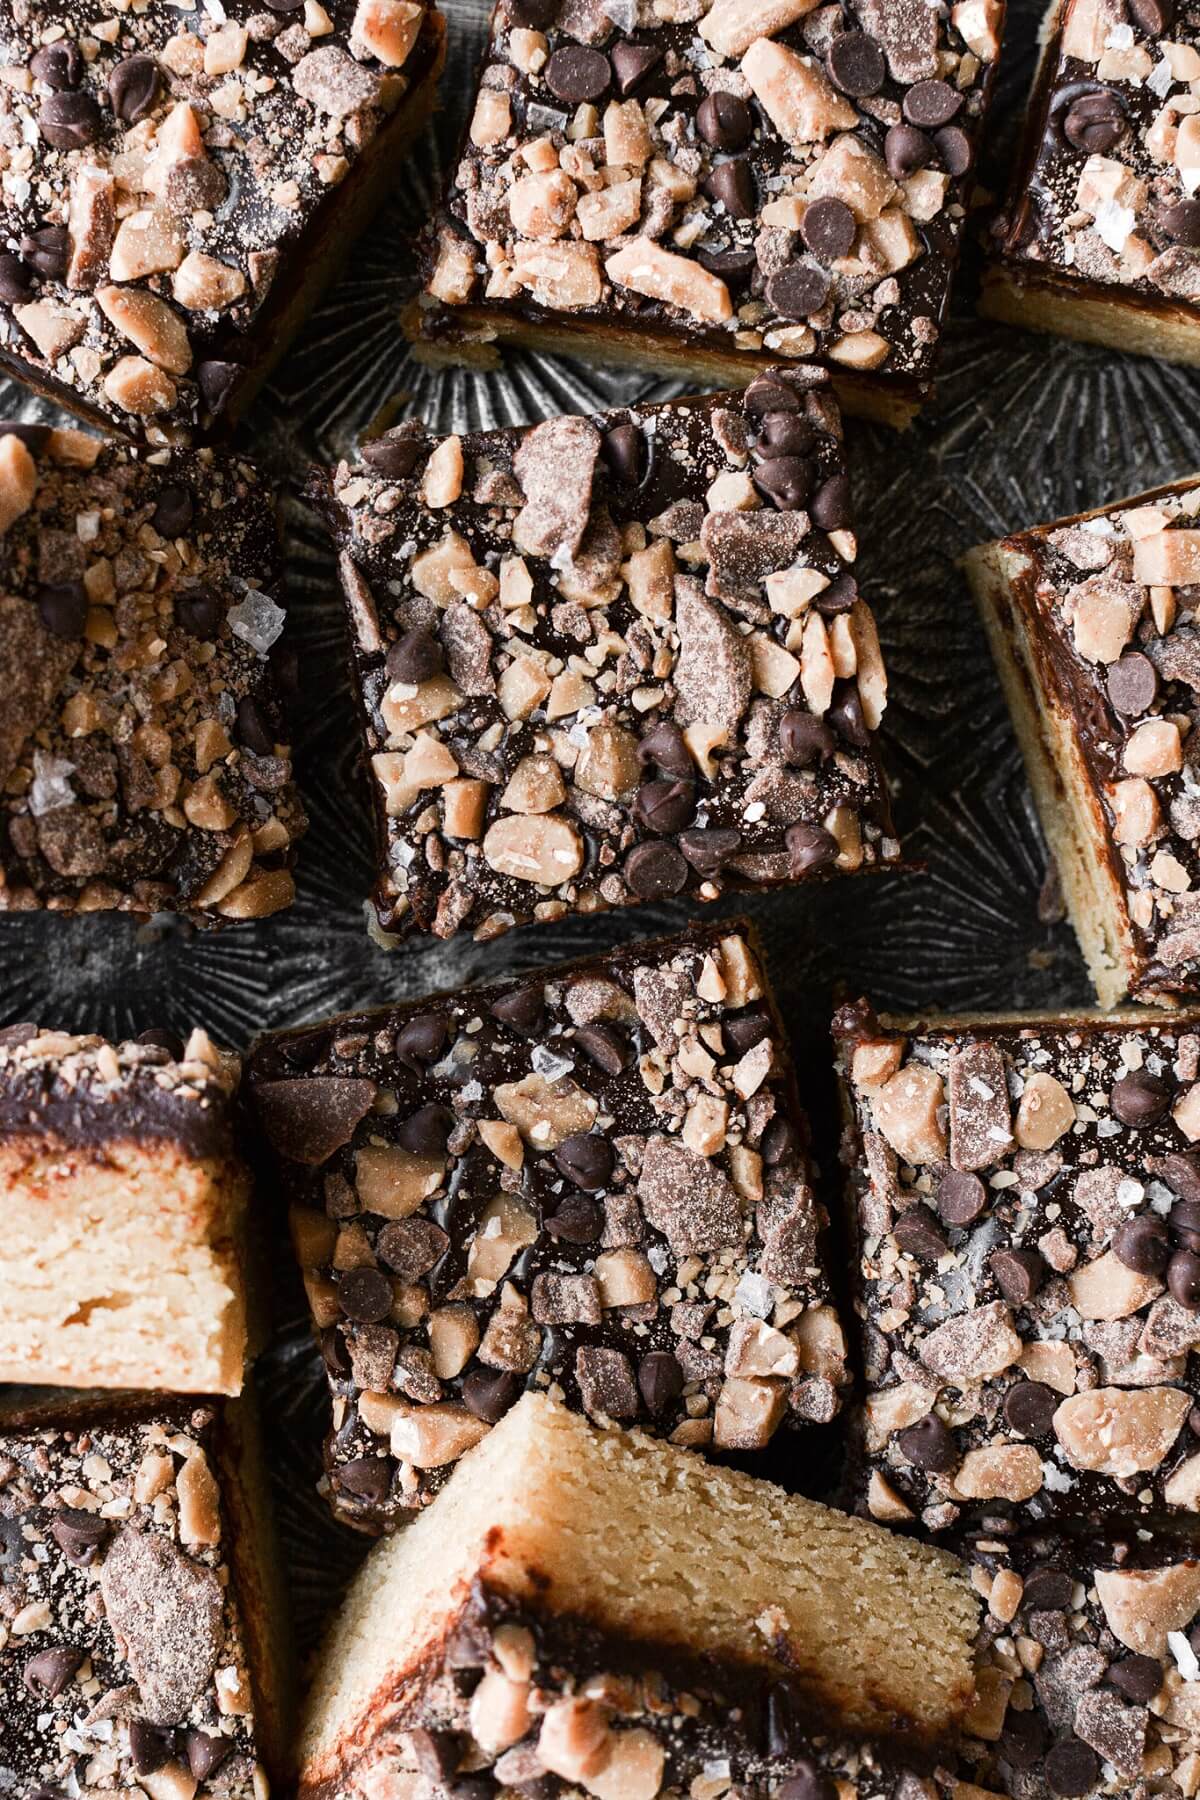 Blondies with ganache and toffee, cut into squares.